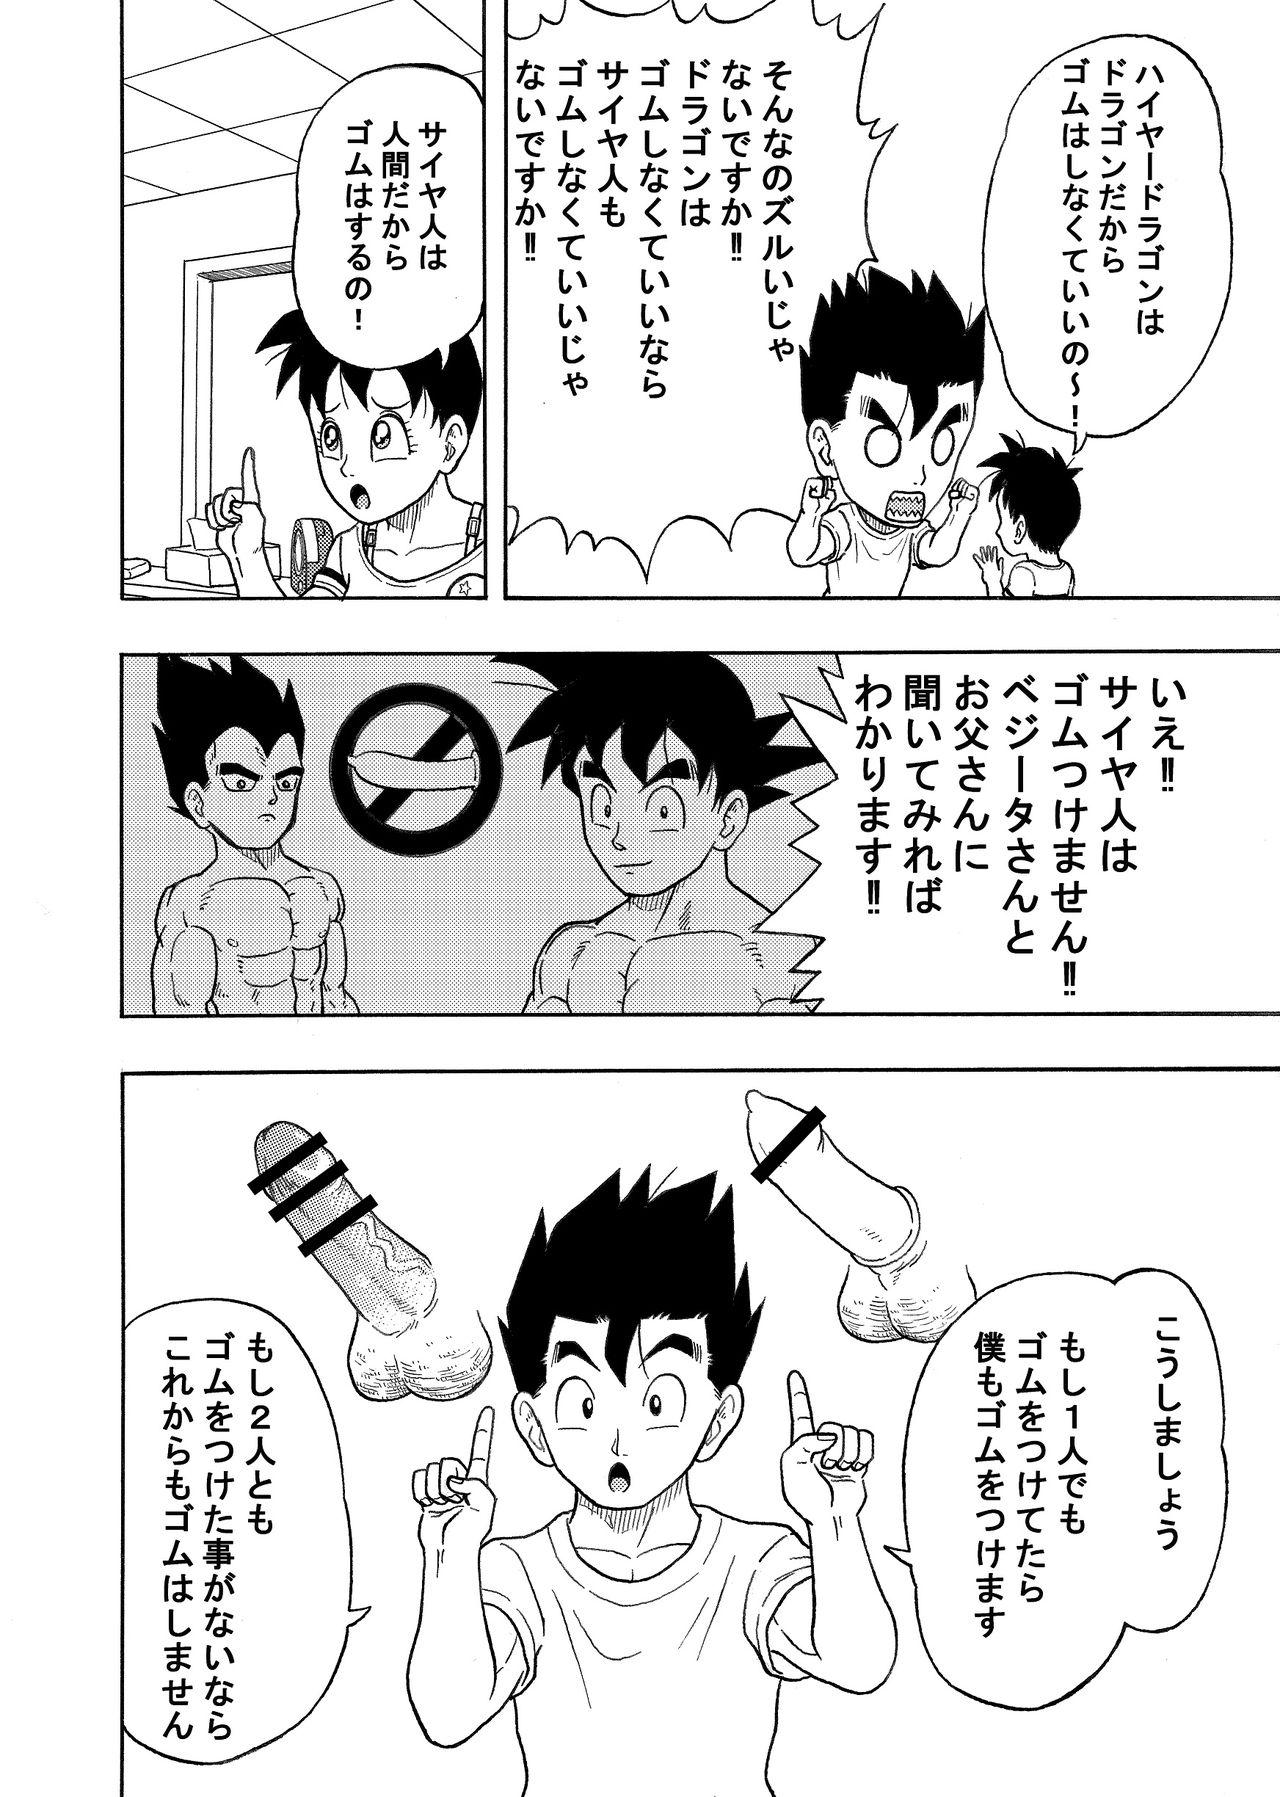 Pene I can't put on a condom - Dragon ball z Time - Page 7